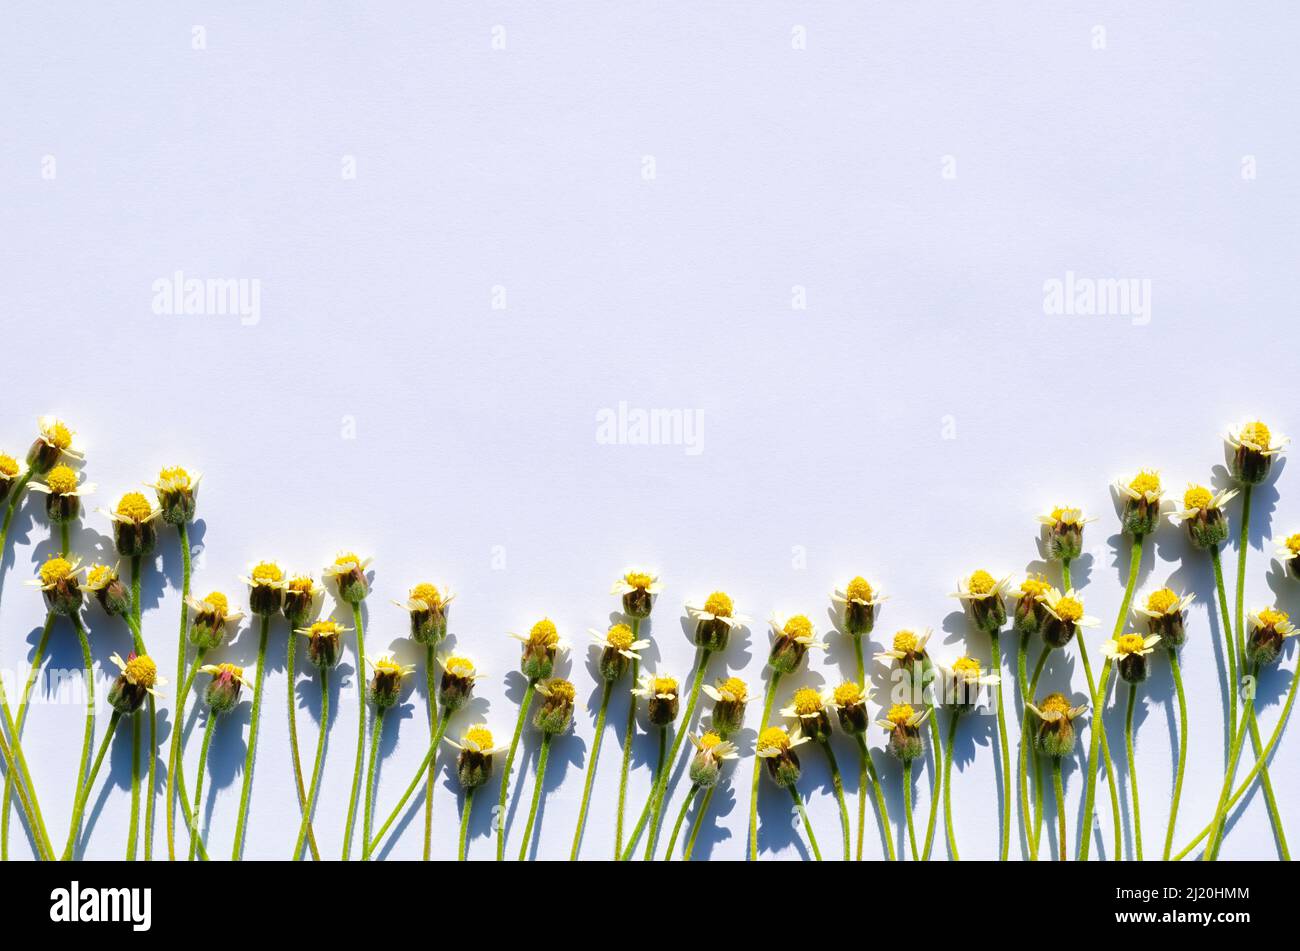 Coatbuttons or Tridax daisy flowers with shadow from sun light put on white paper background. Stock Photo